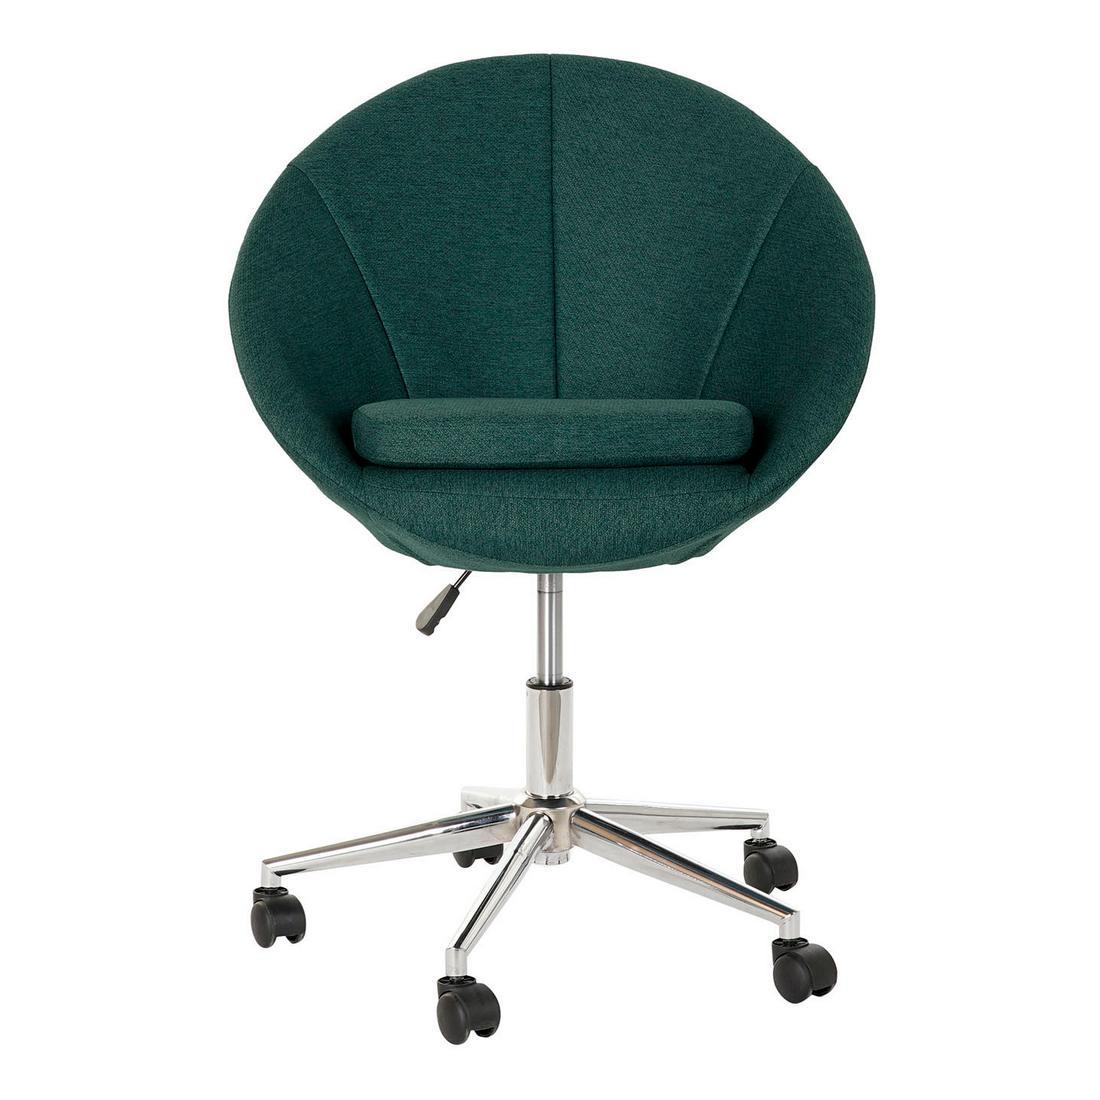 Contemporary office chair "ANSO"